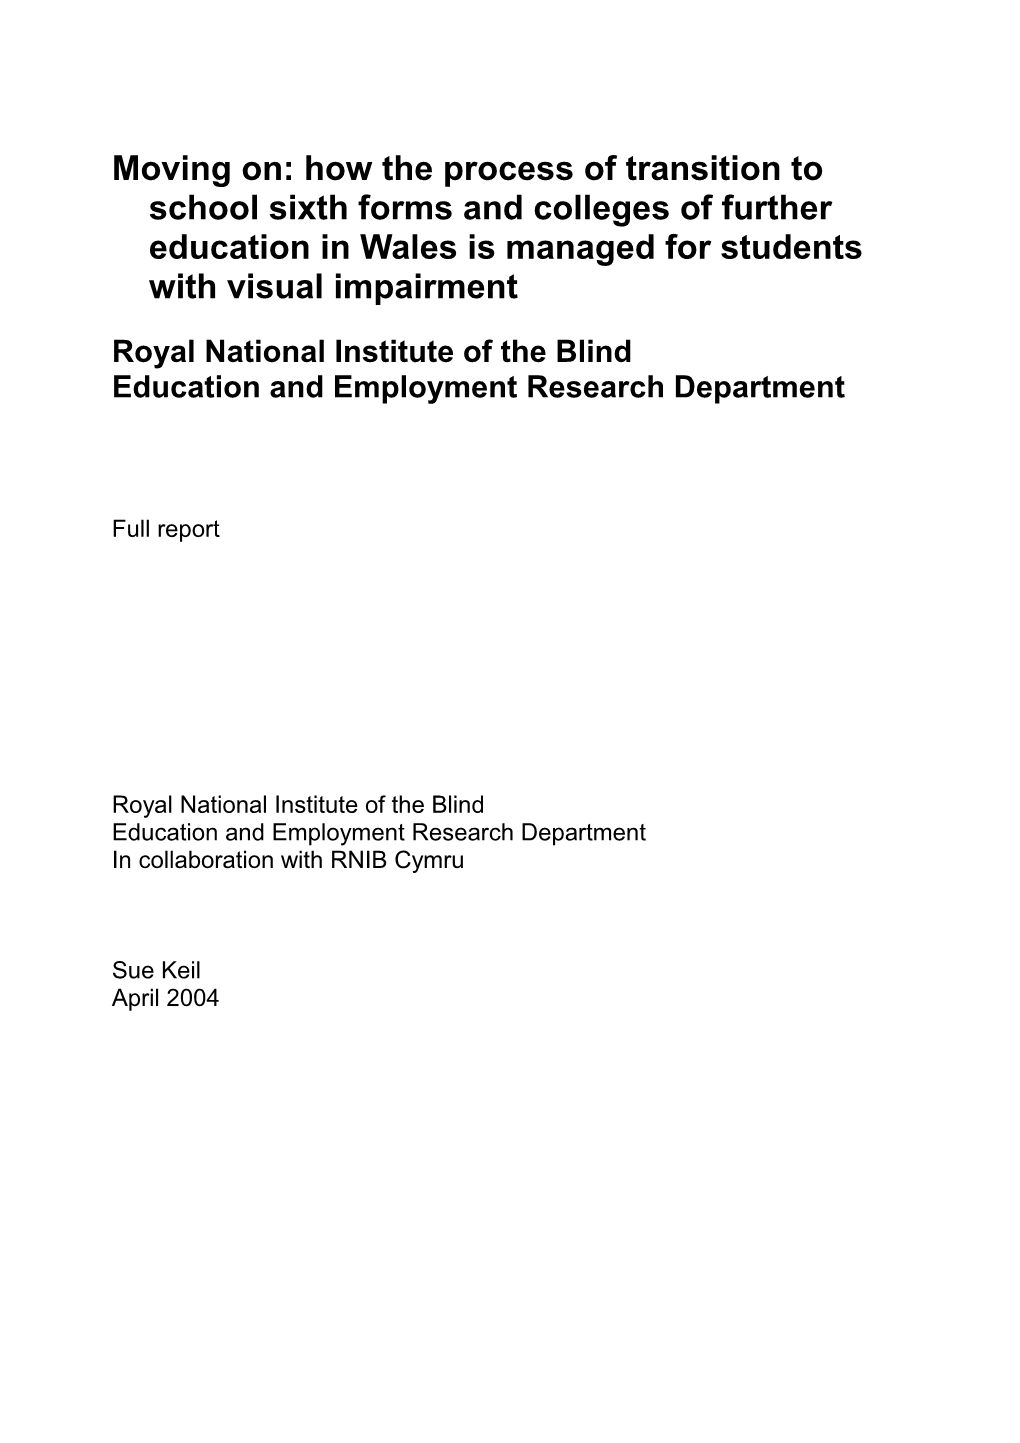 Moving On: Transition to Further Education for Visually Impaired Students in Wales